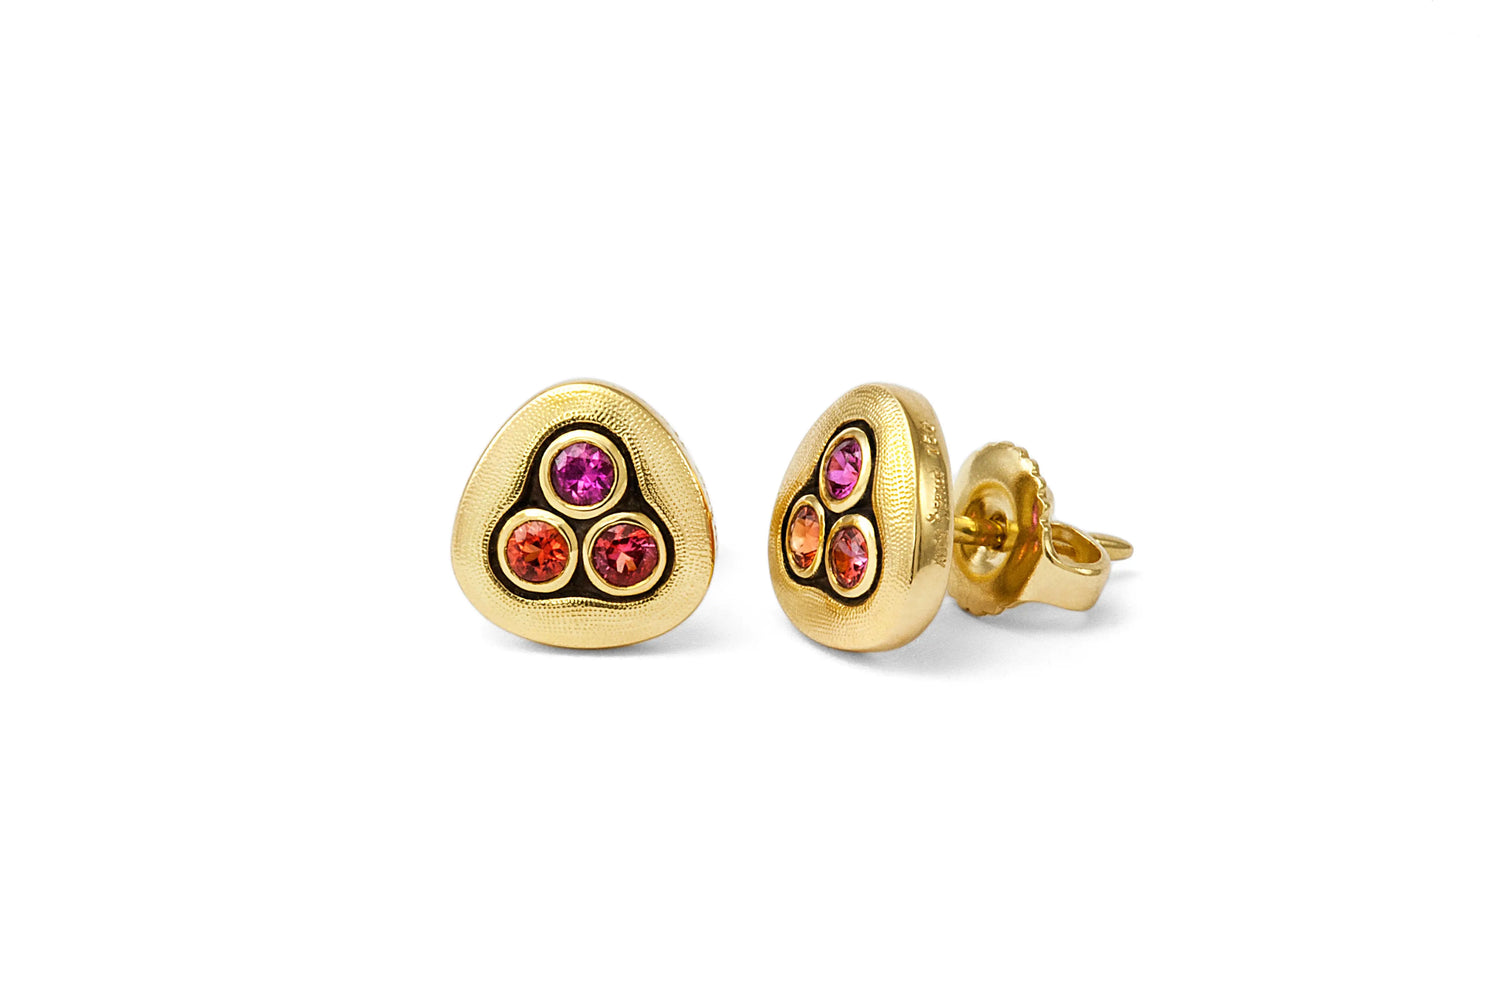 18K Yellow Gold Sapphire "Swirling Water" Stud Earrings  Details: 6 pink and orange sapphires Designed by Alex Sepkus and made in NYC